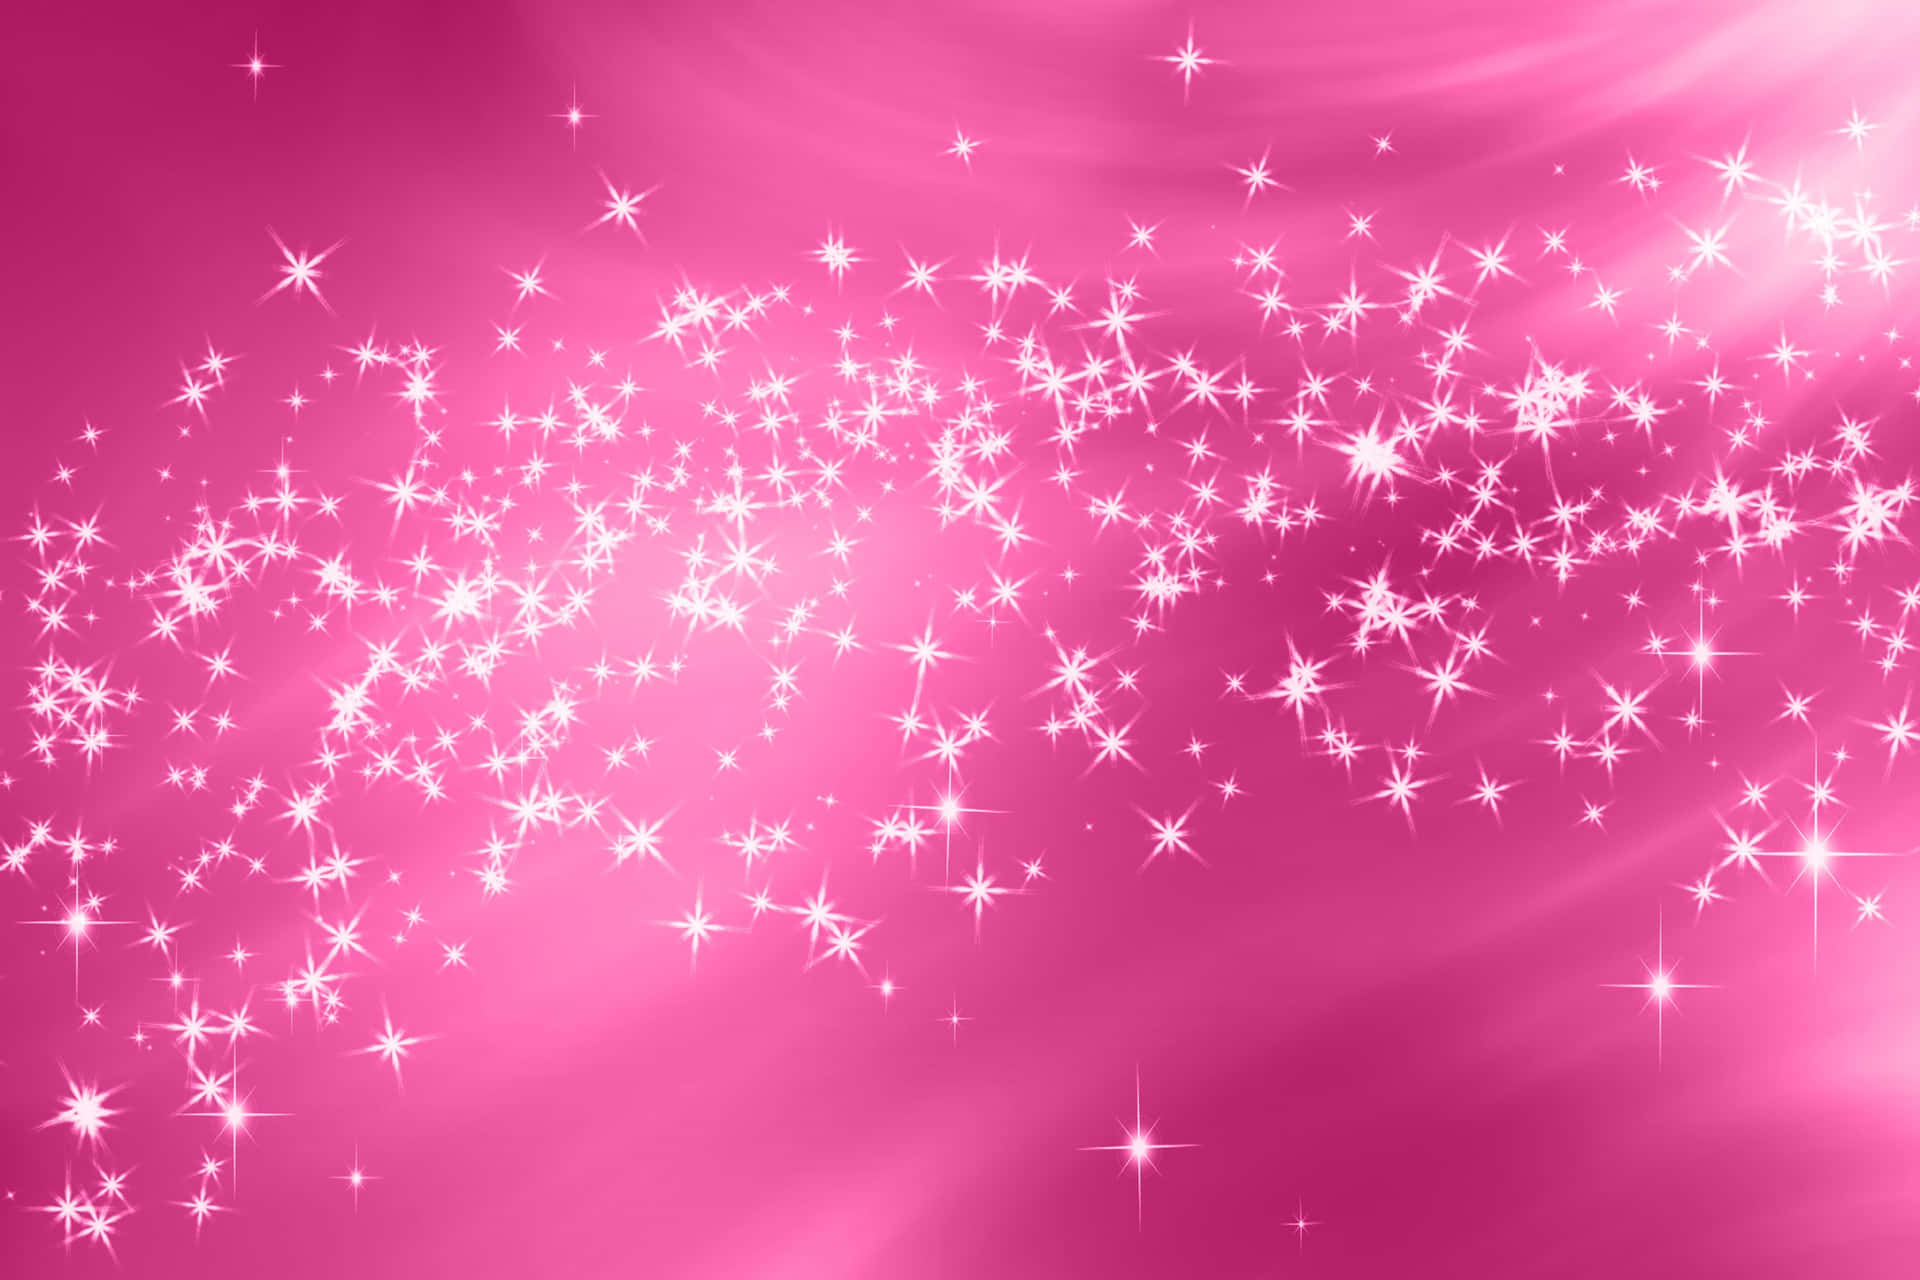 Pink Background With Stars And Sparkles